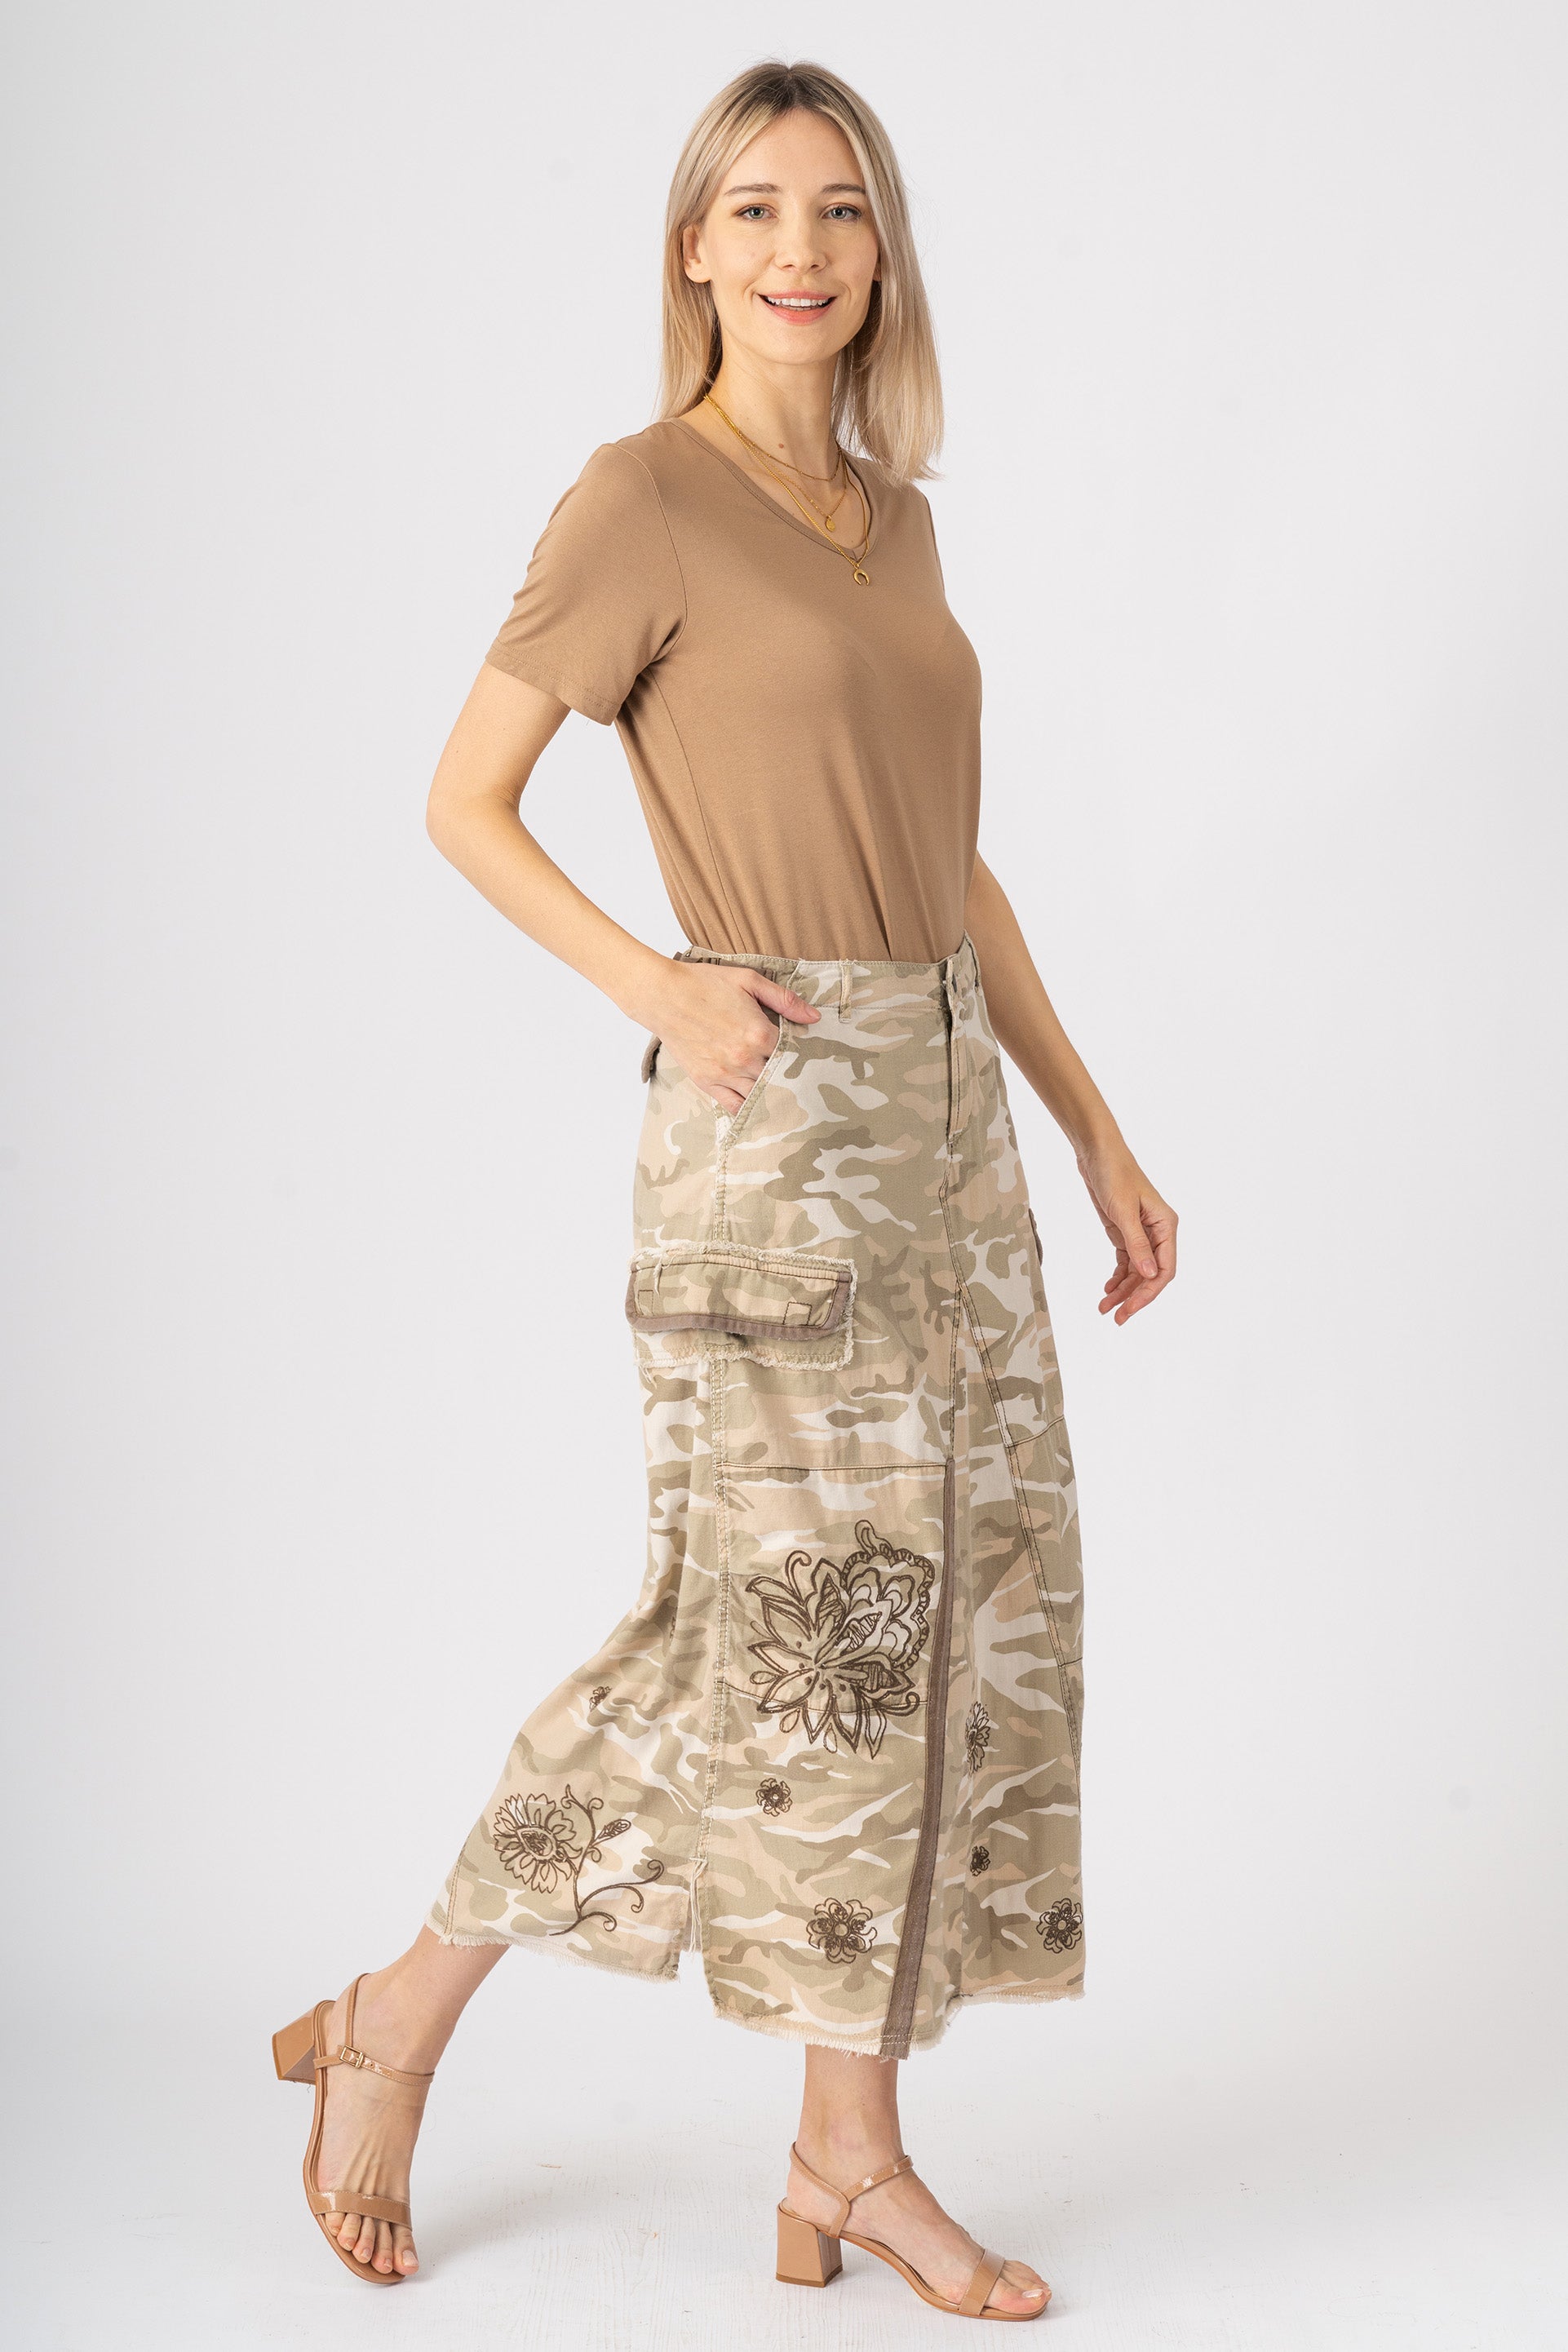 Tencel long skirt with embroidery in White Camo